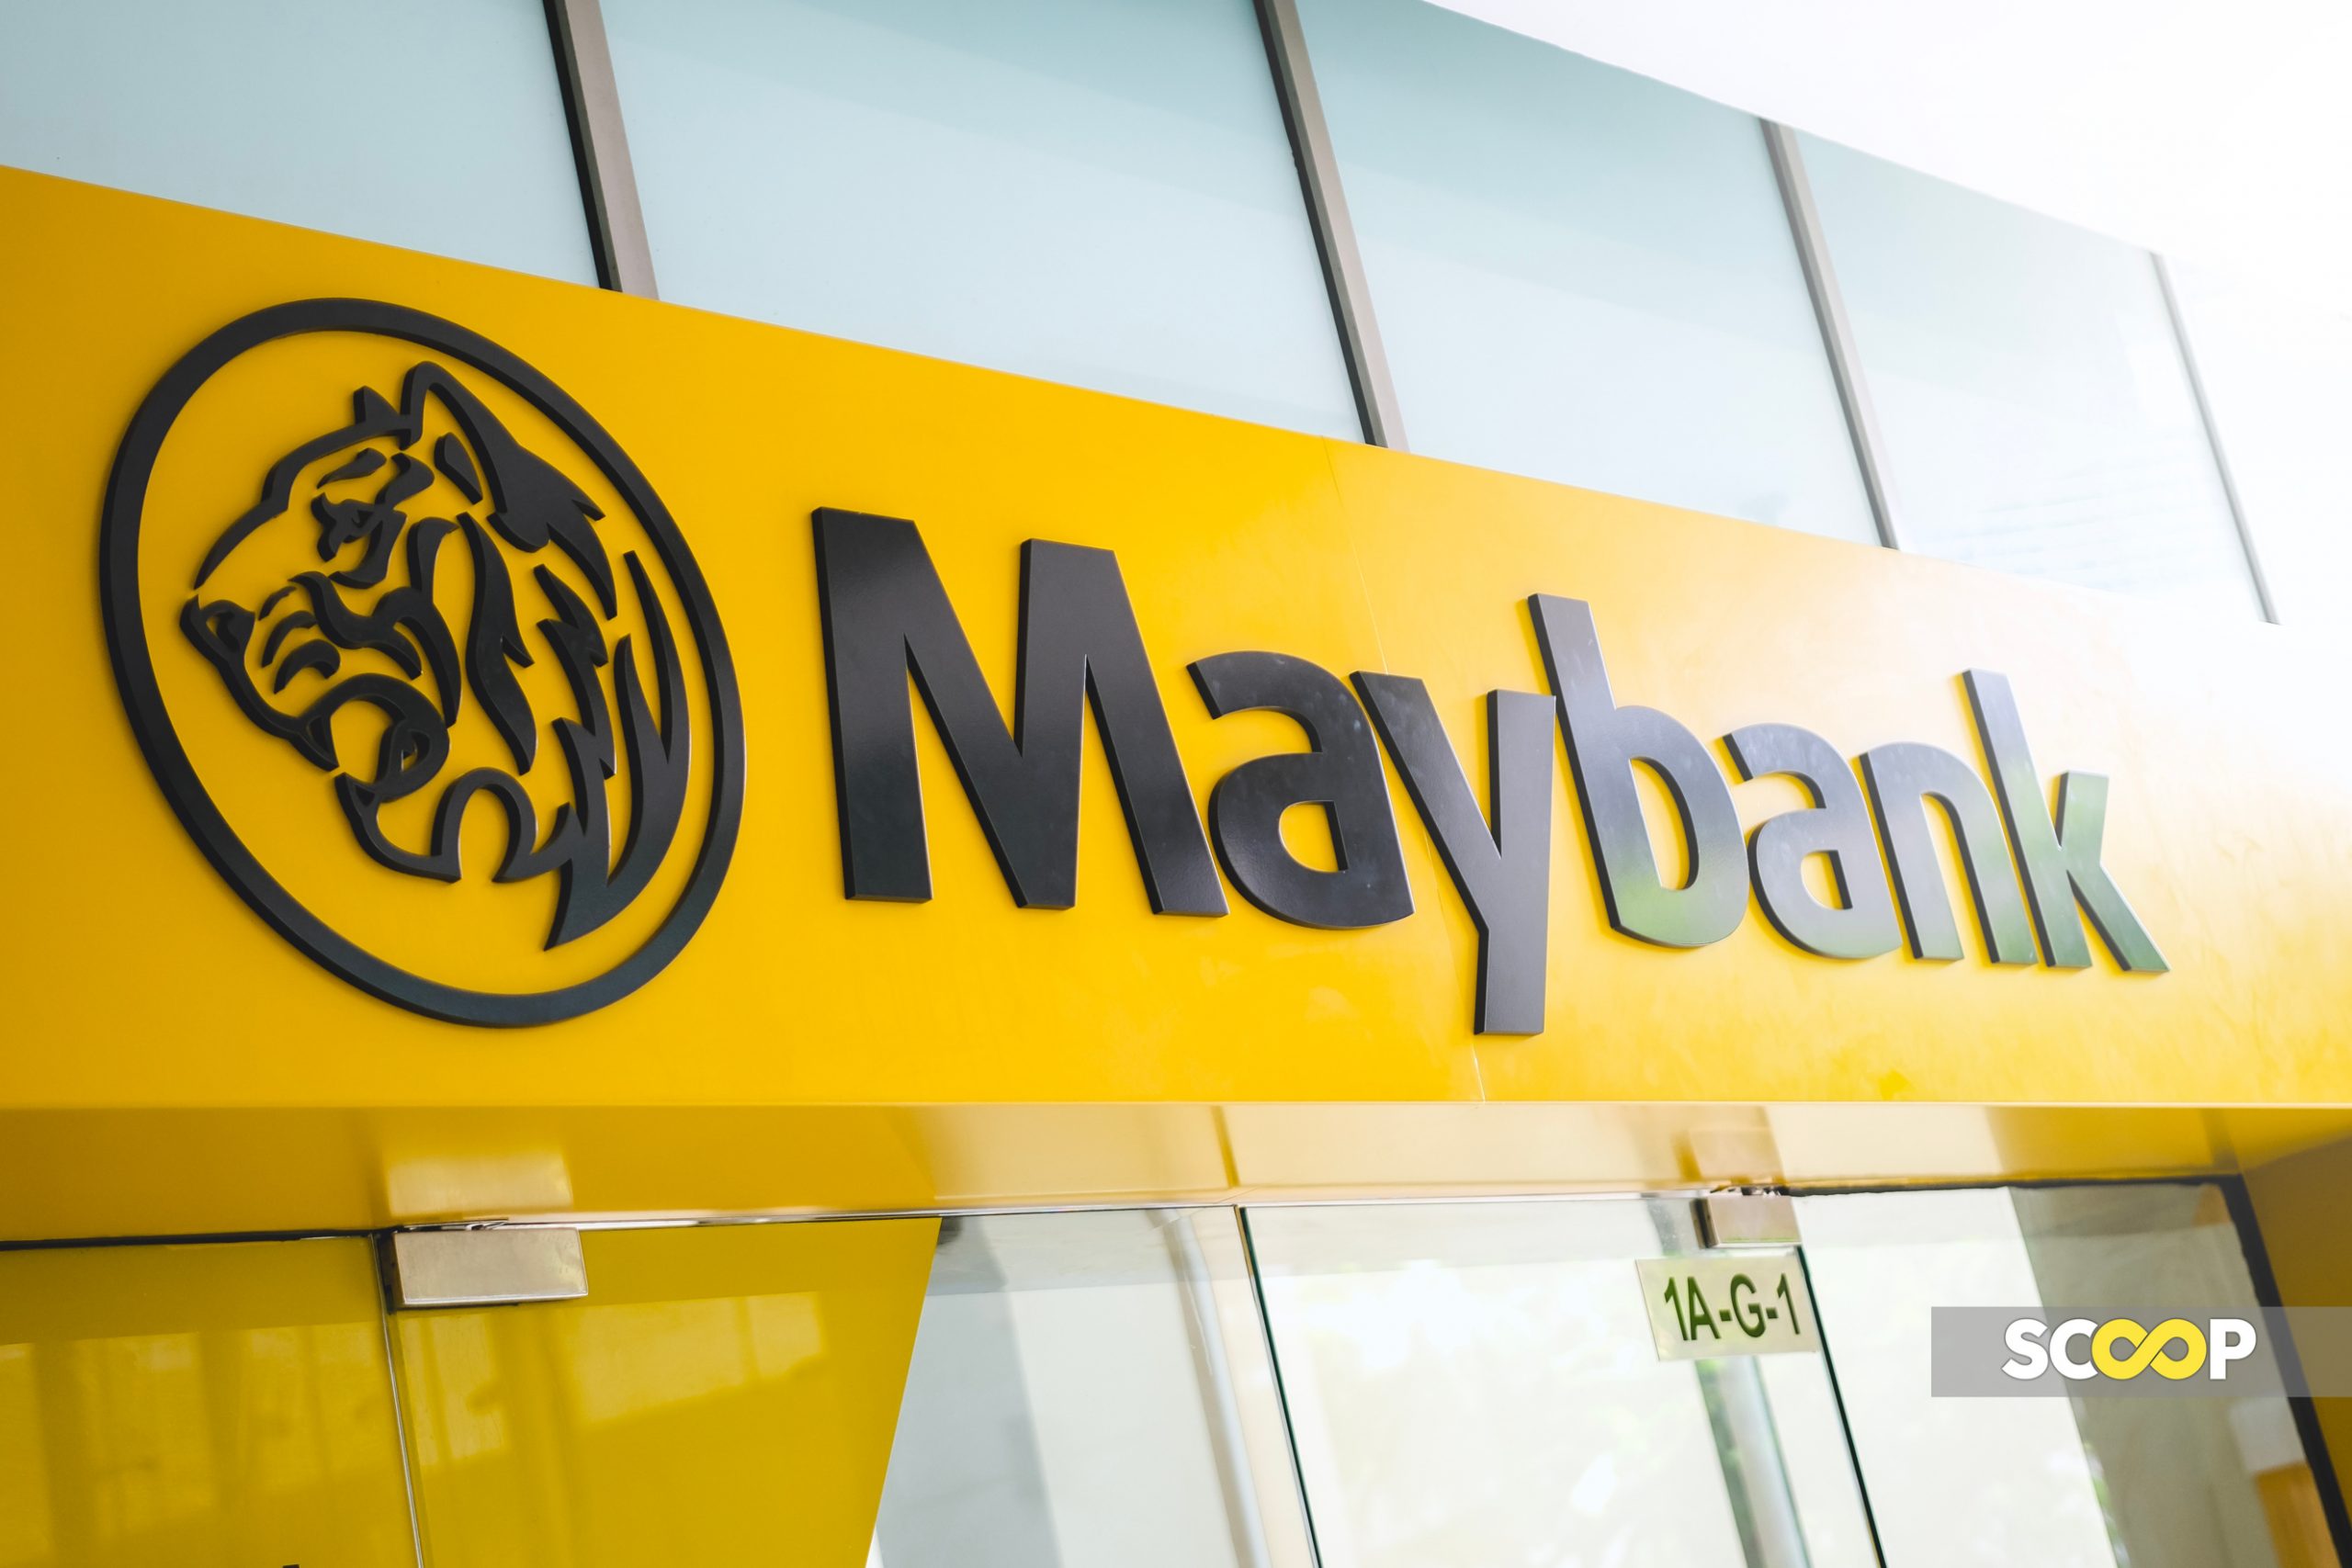 [UPDATED] Maybank’s mobile app hit by service disruptions